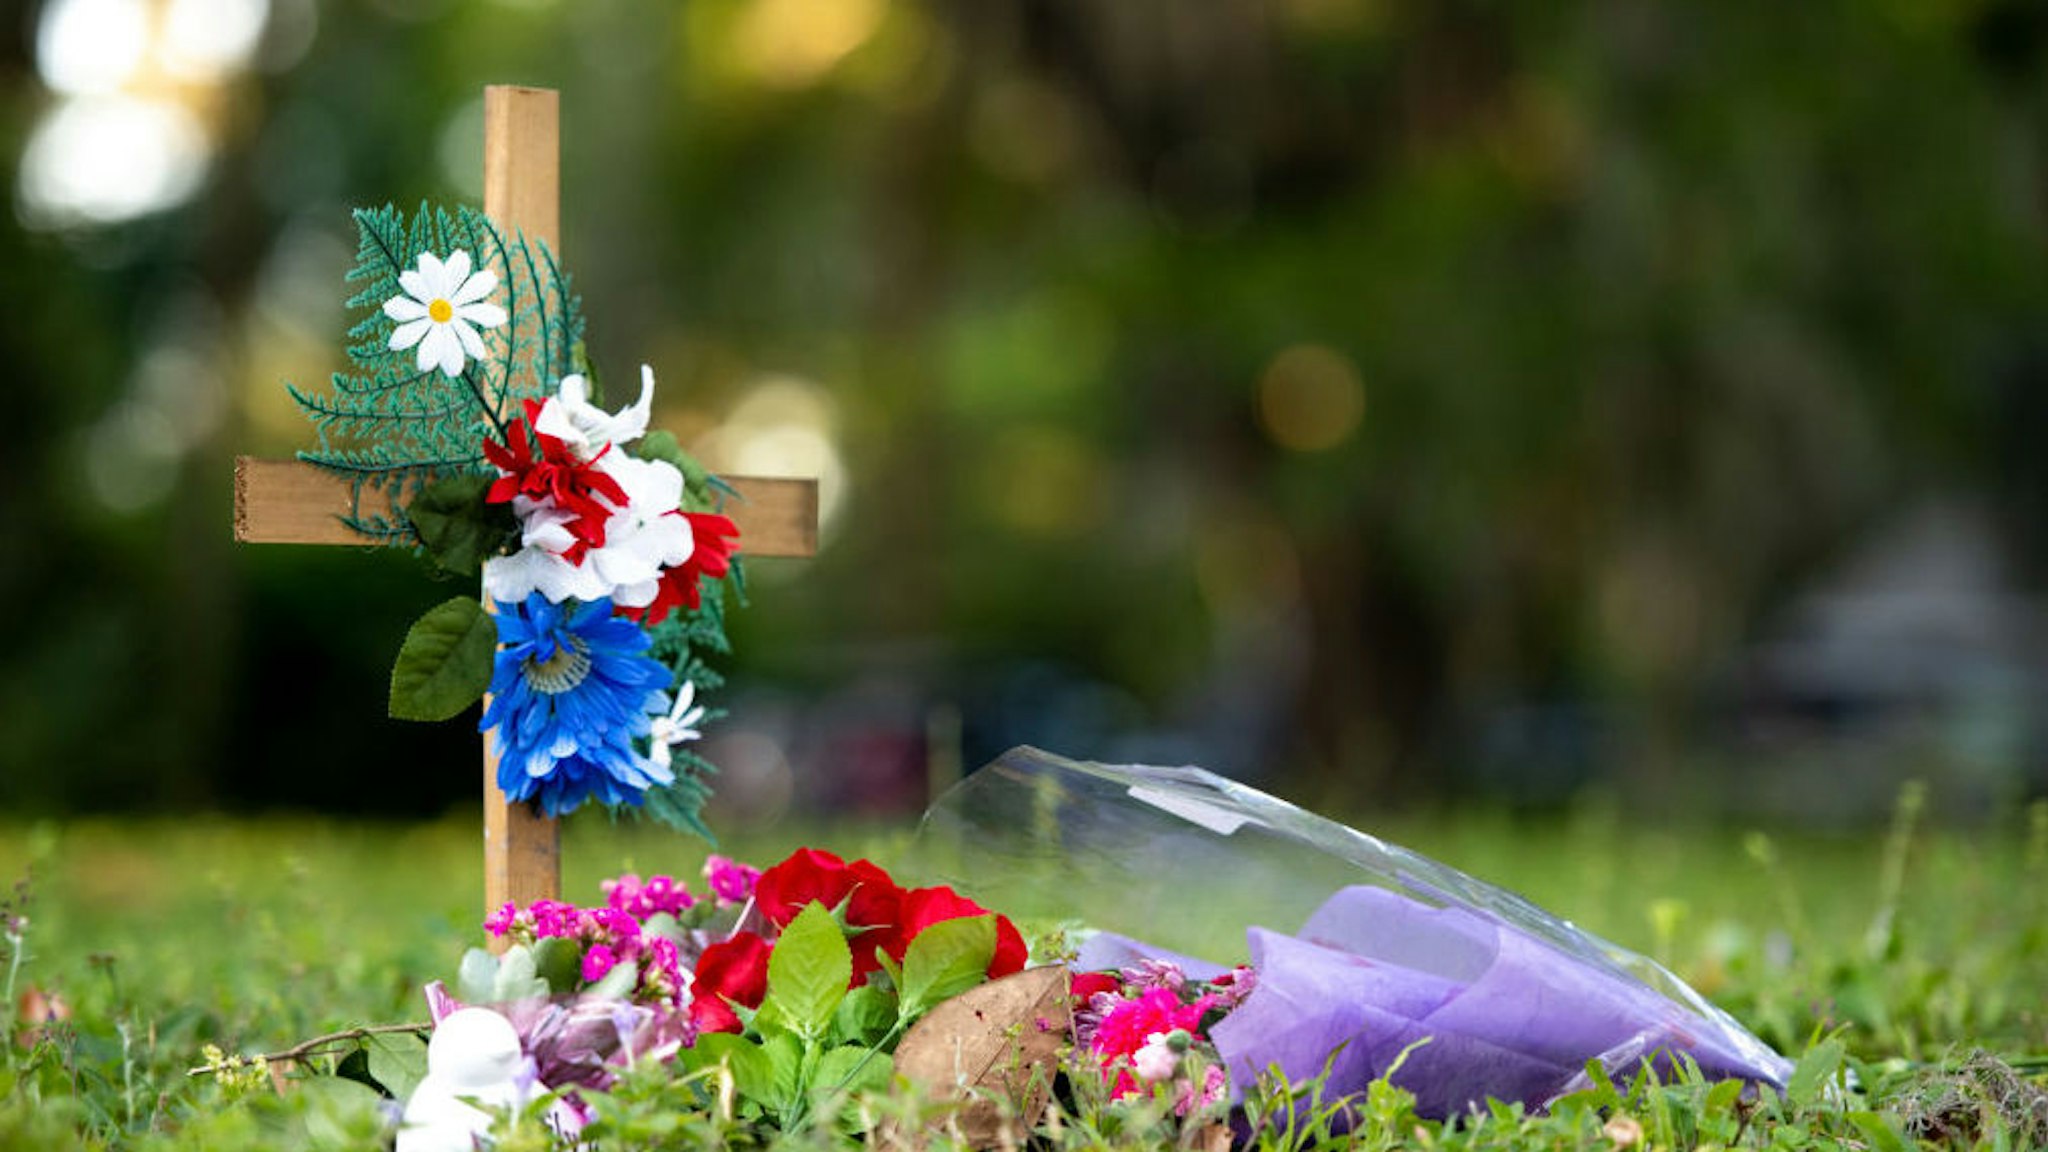 BRUNSWICK, GA - MAY 07: A cross with flowers sits near the intersection of Satilla Rd. and Holmes Rd. in the Satilla Shores neighborhood where Ahmaud Arbery was shot and killed May 7, 2020 in Brunswick, Georgia. Arbery was shot during a confrontation with an armed father and son on Feb. 23.